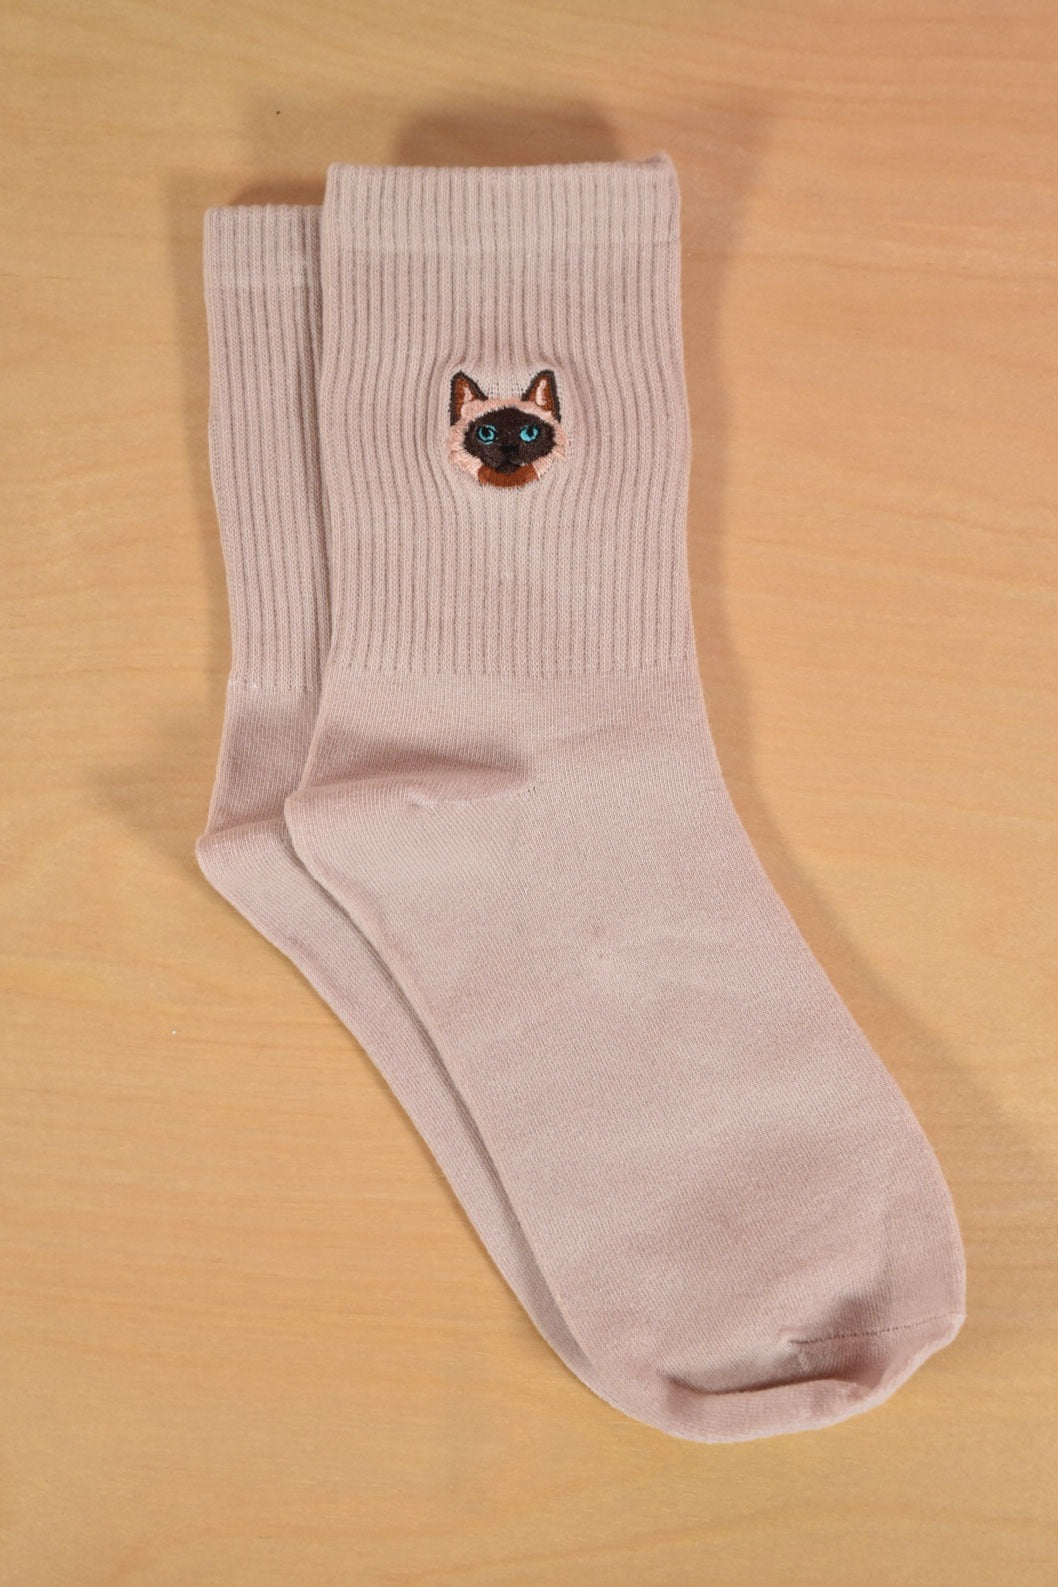 Embroidered Cat Socks